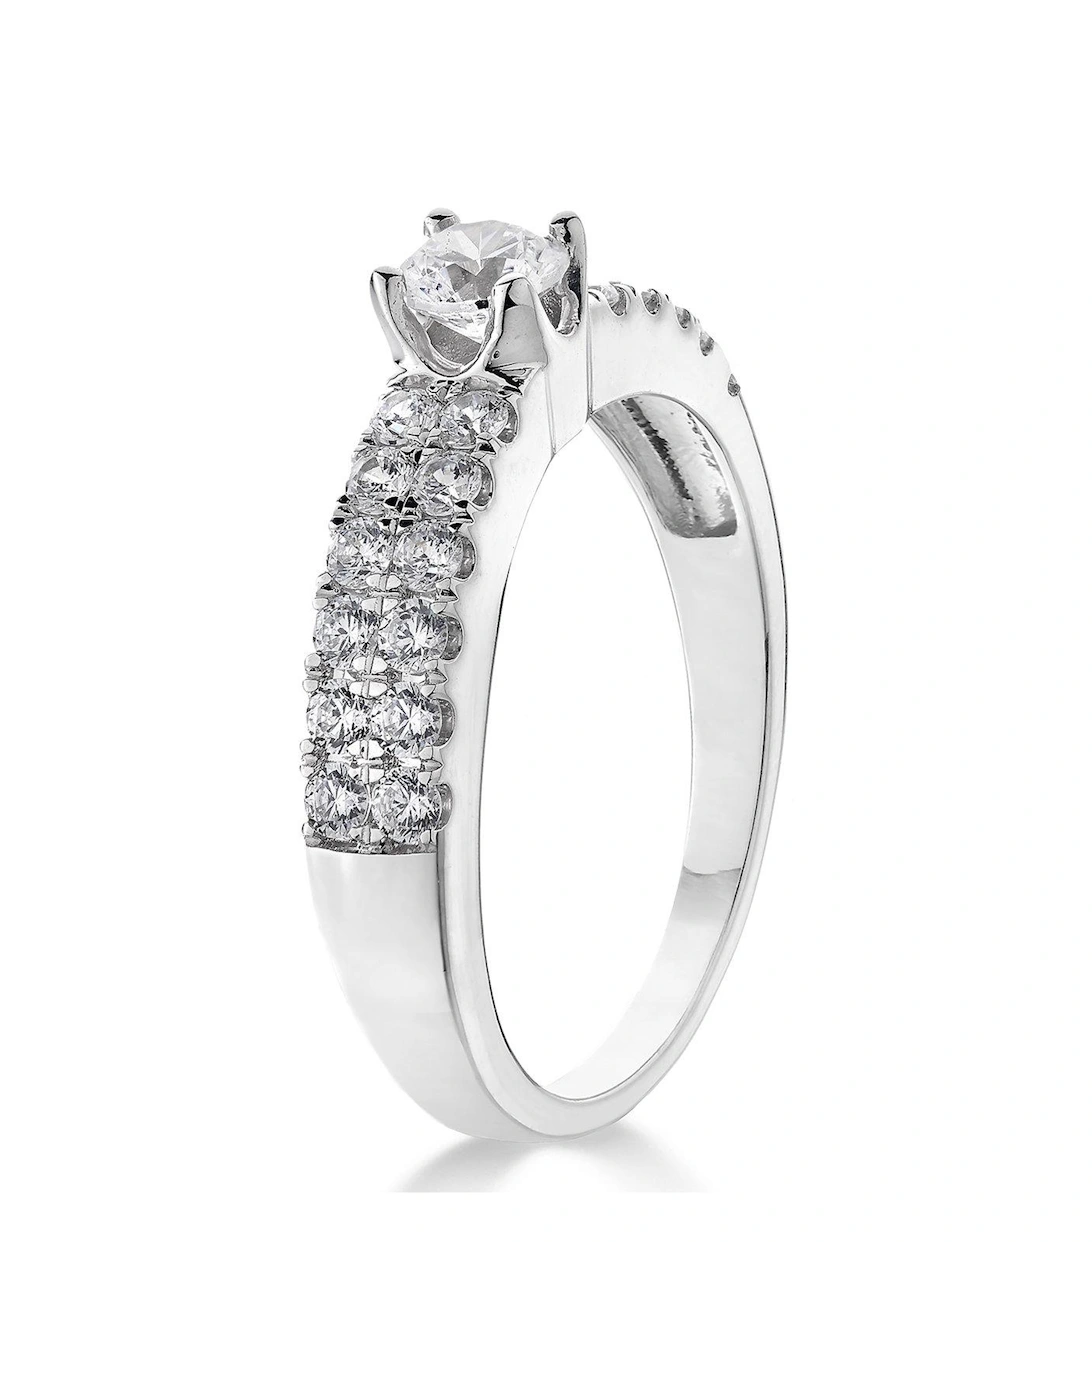 9ct White Gold 1ct Two-Row Diamond Solitaire Ring with Set Shoulders